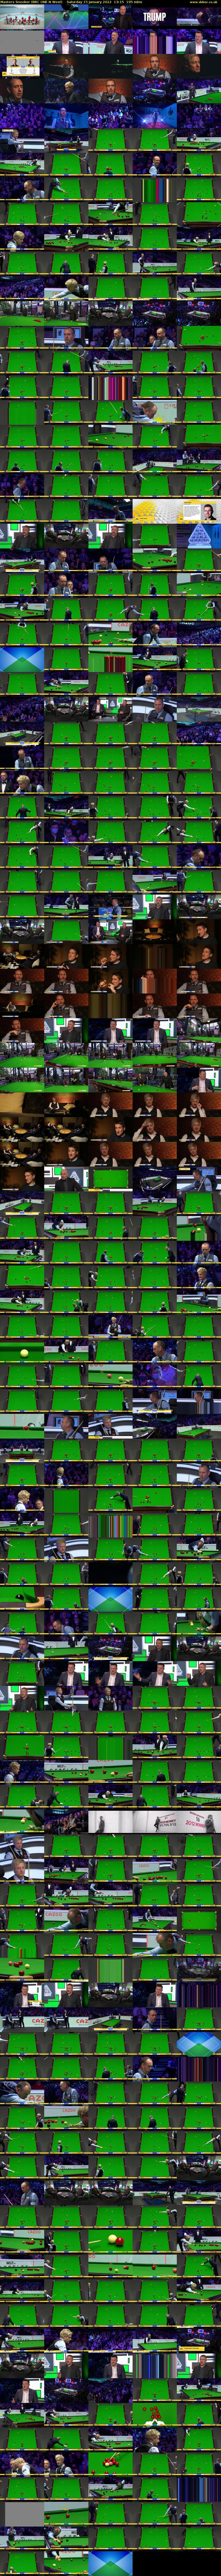 Masters Snooker (BBC ONE N West) Saturday 15 January 2022 13:15 - 16:30